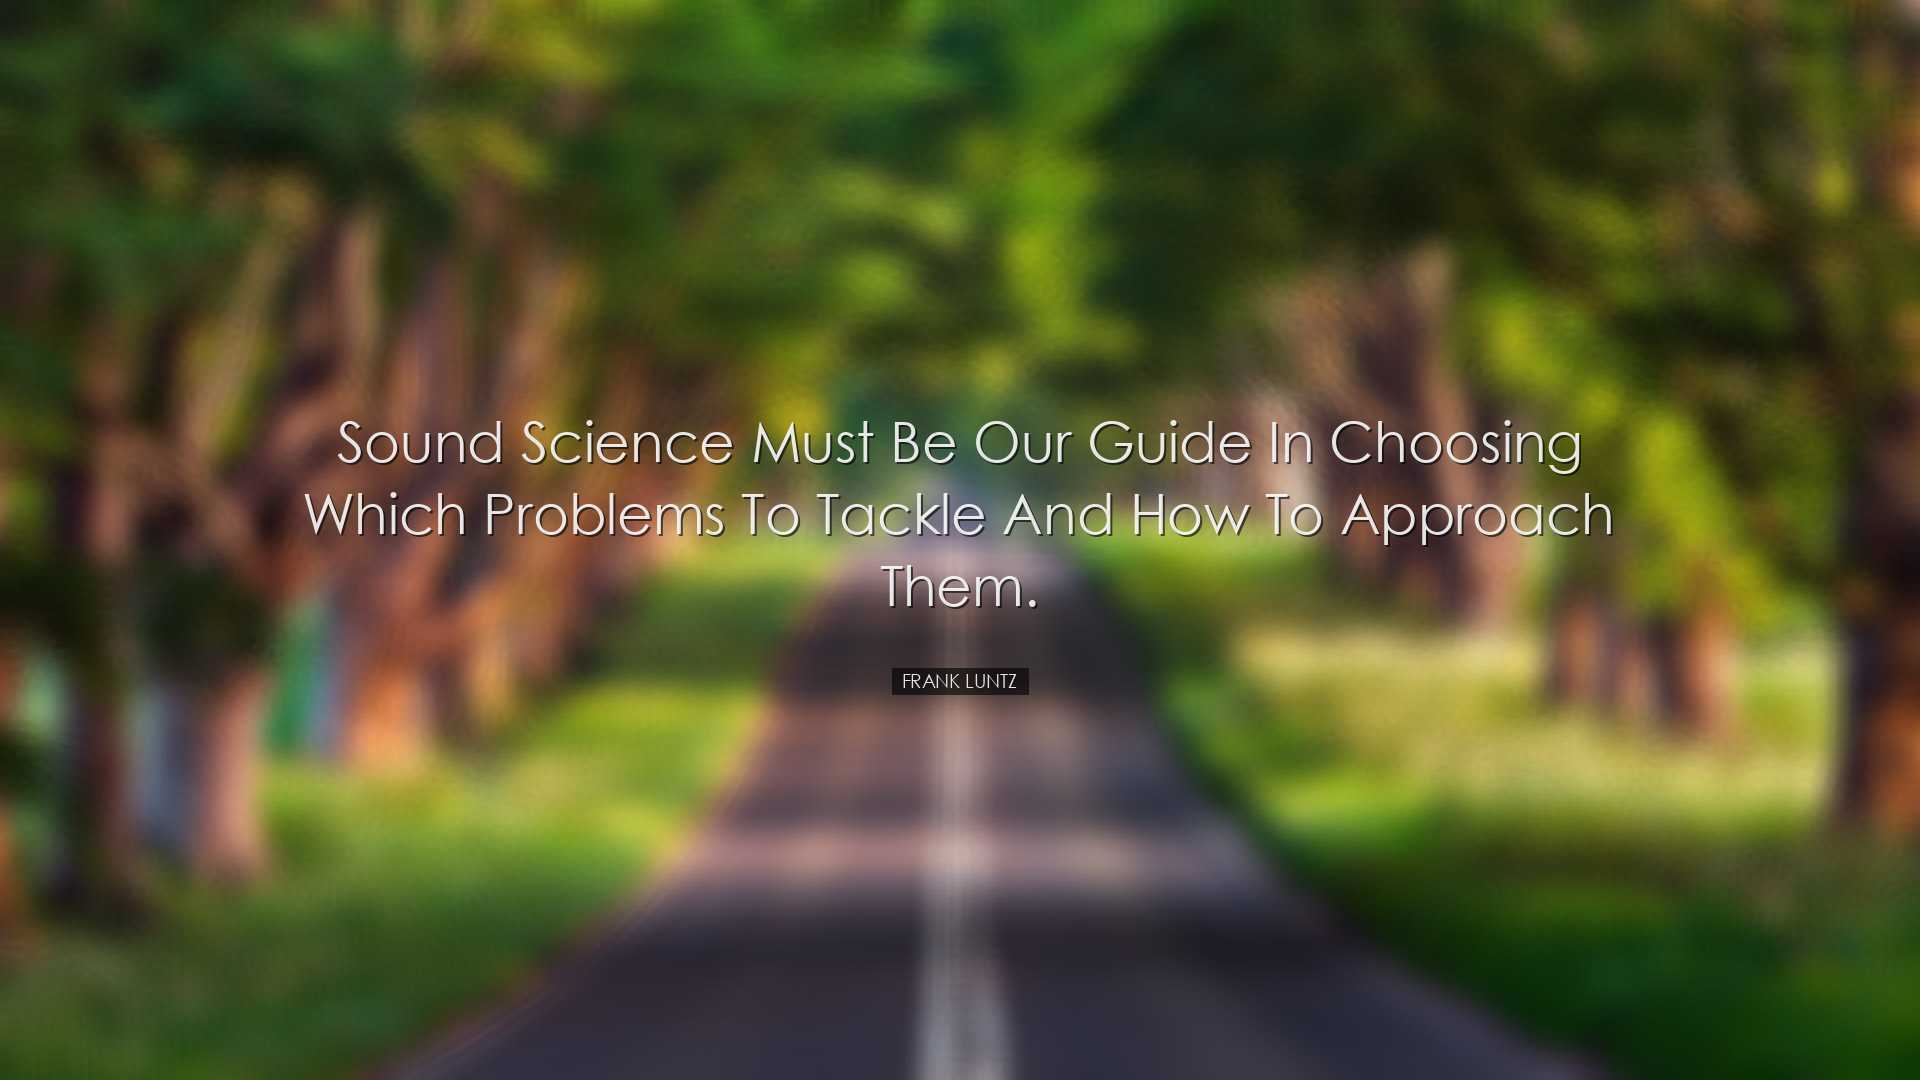 Sound science must be our guide in choosing which problems to tack